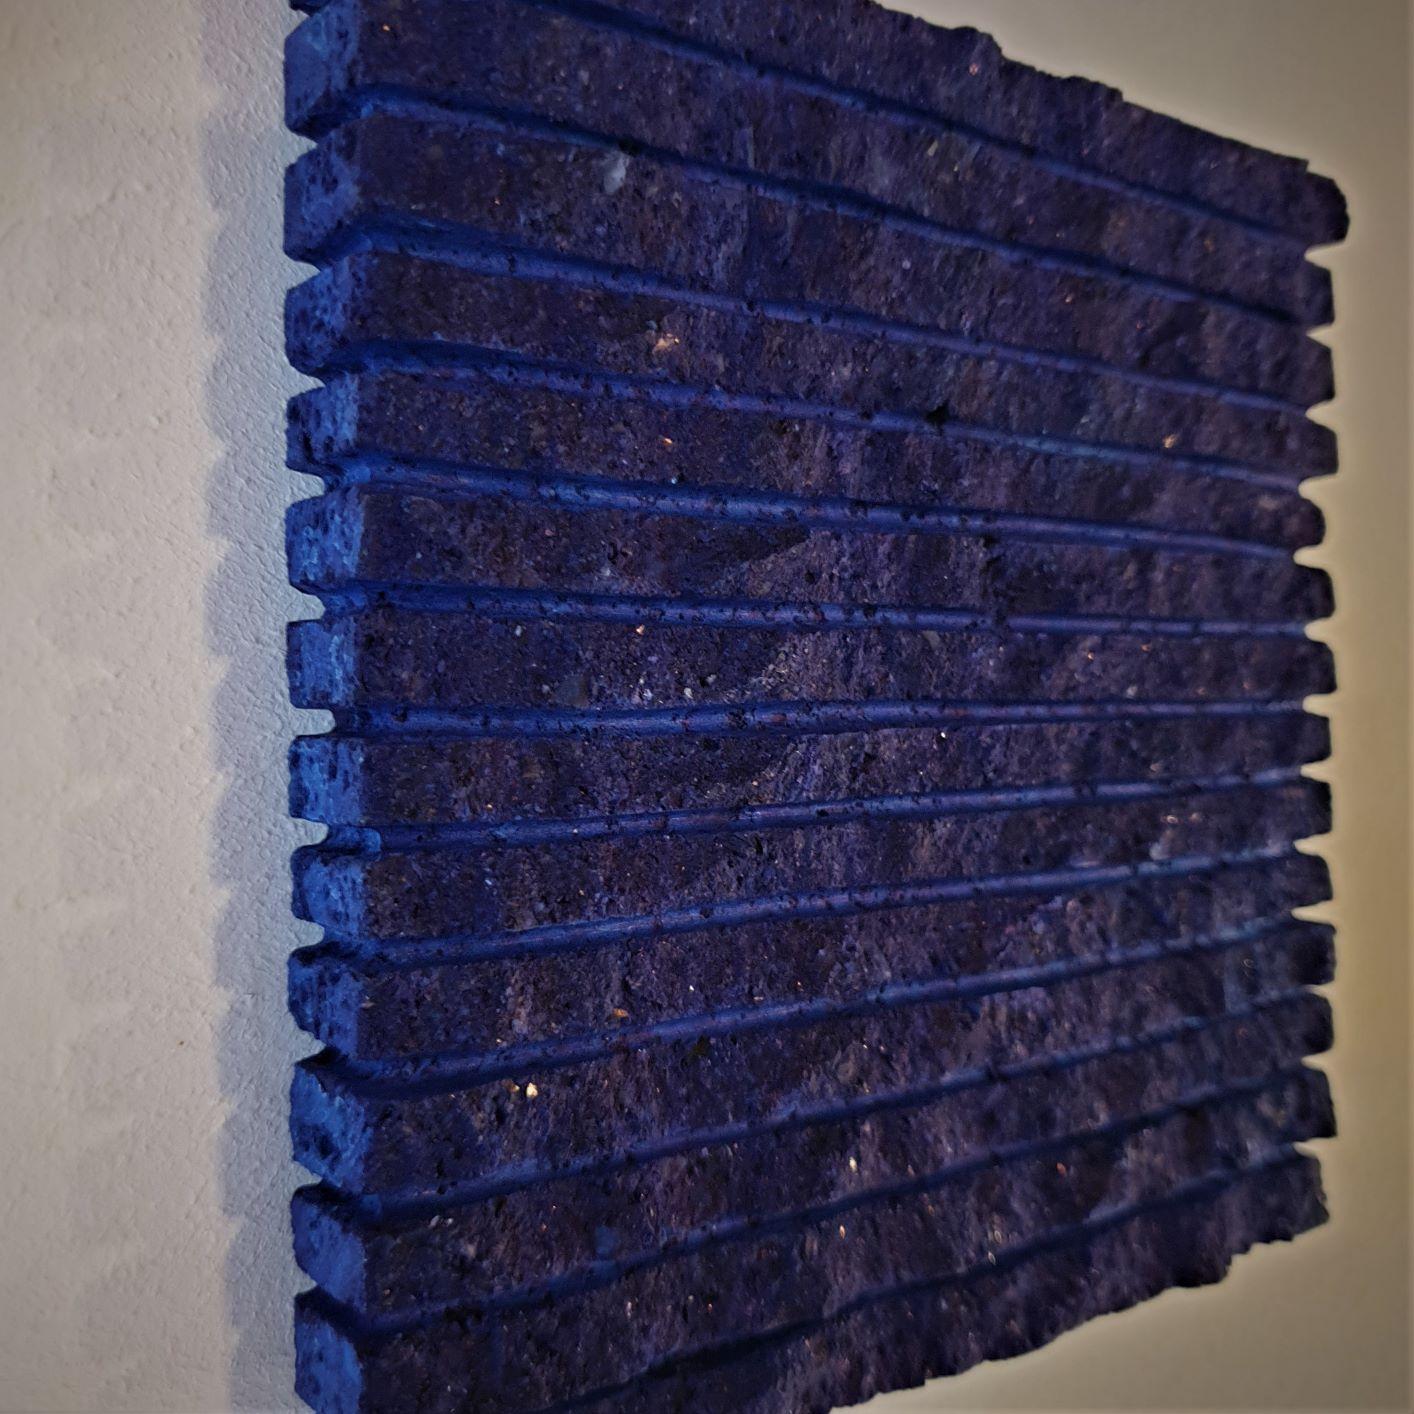 o.T. (Bl15HL) - blue contemporary modern wall sculpture painting relief - Contemporary Painting by Dieter Kränzlein